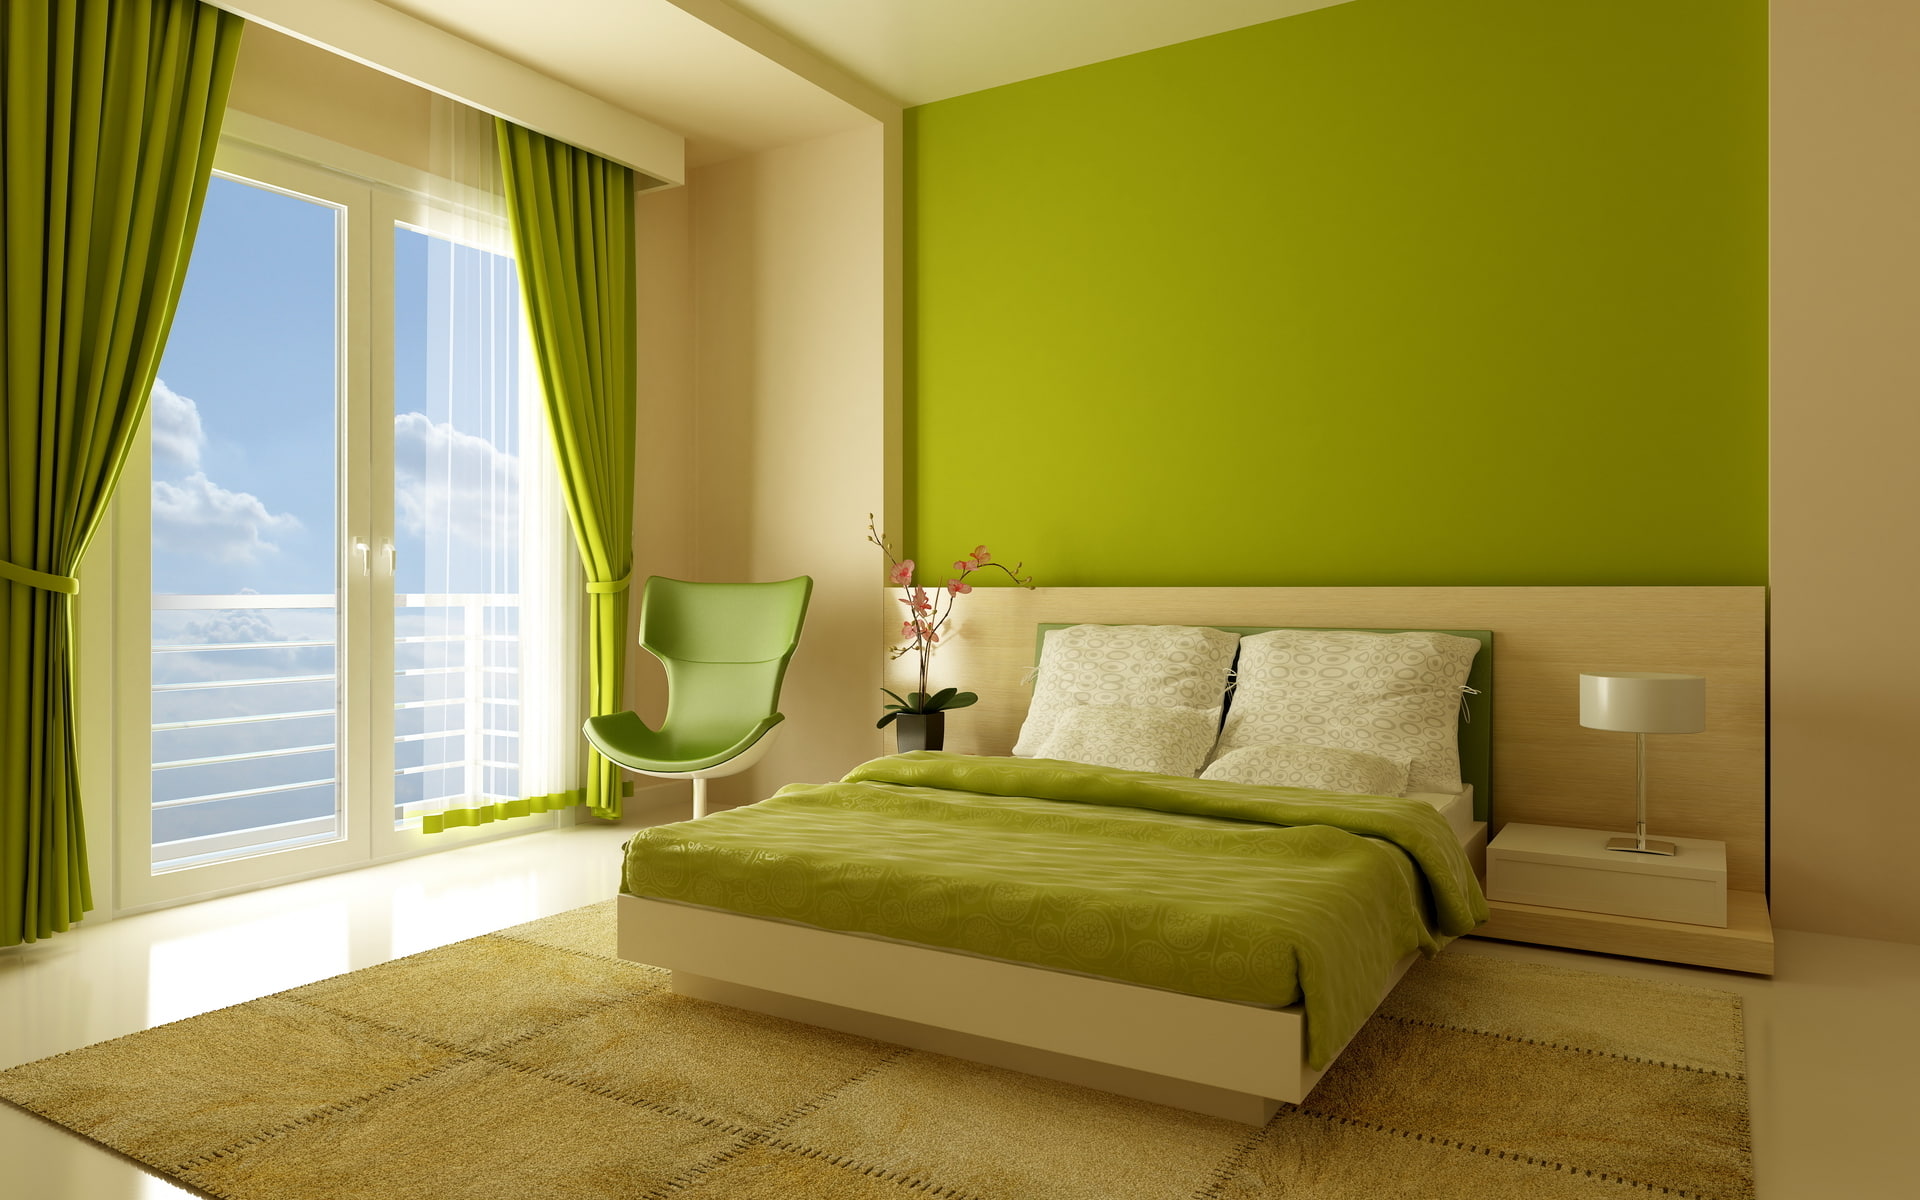 design, style, room, bed, interior, chair, window, green, apartment